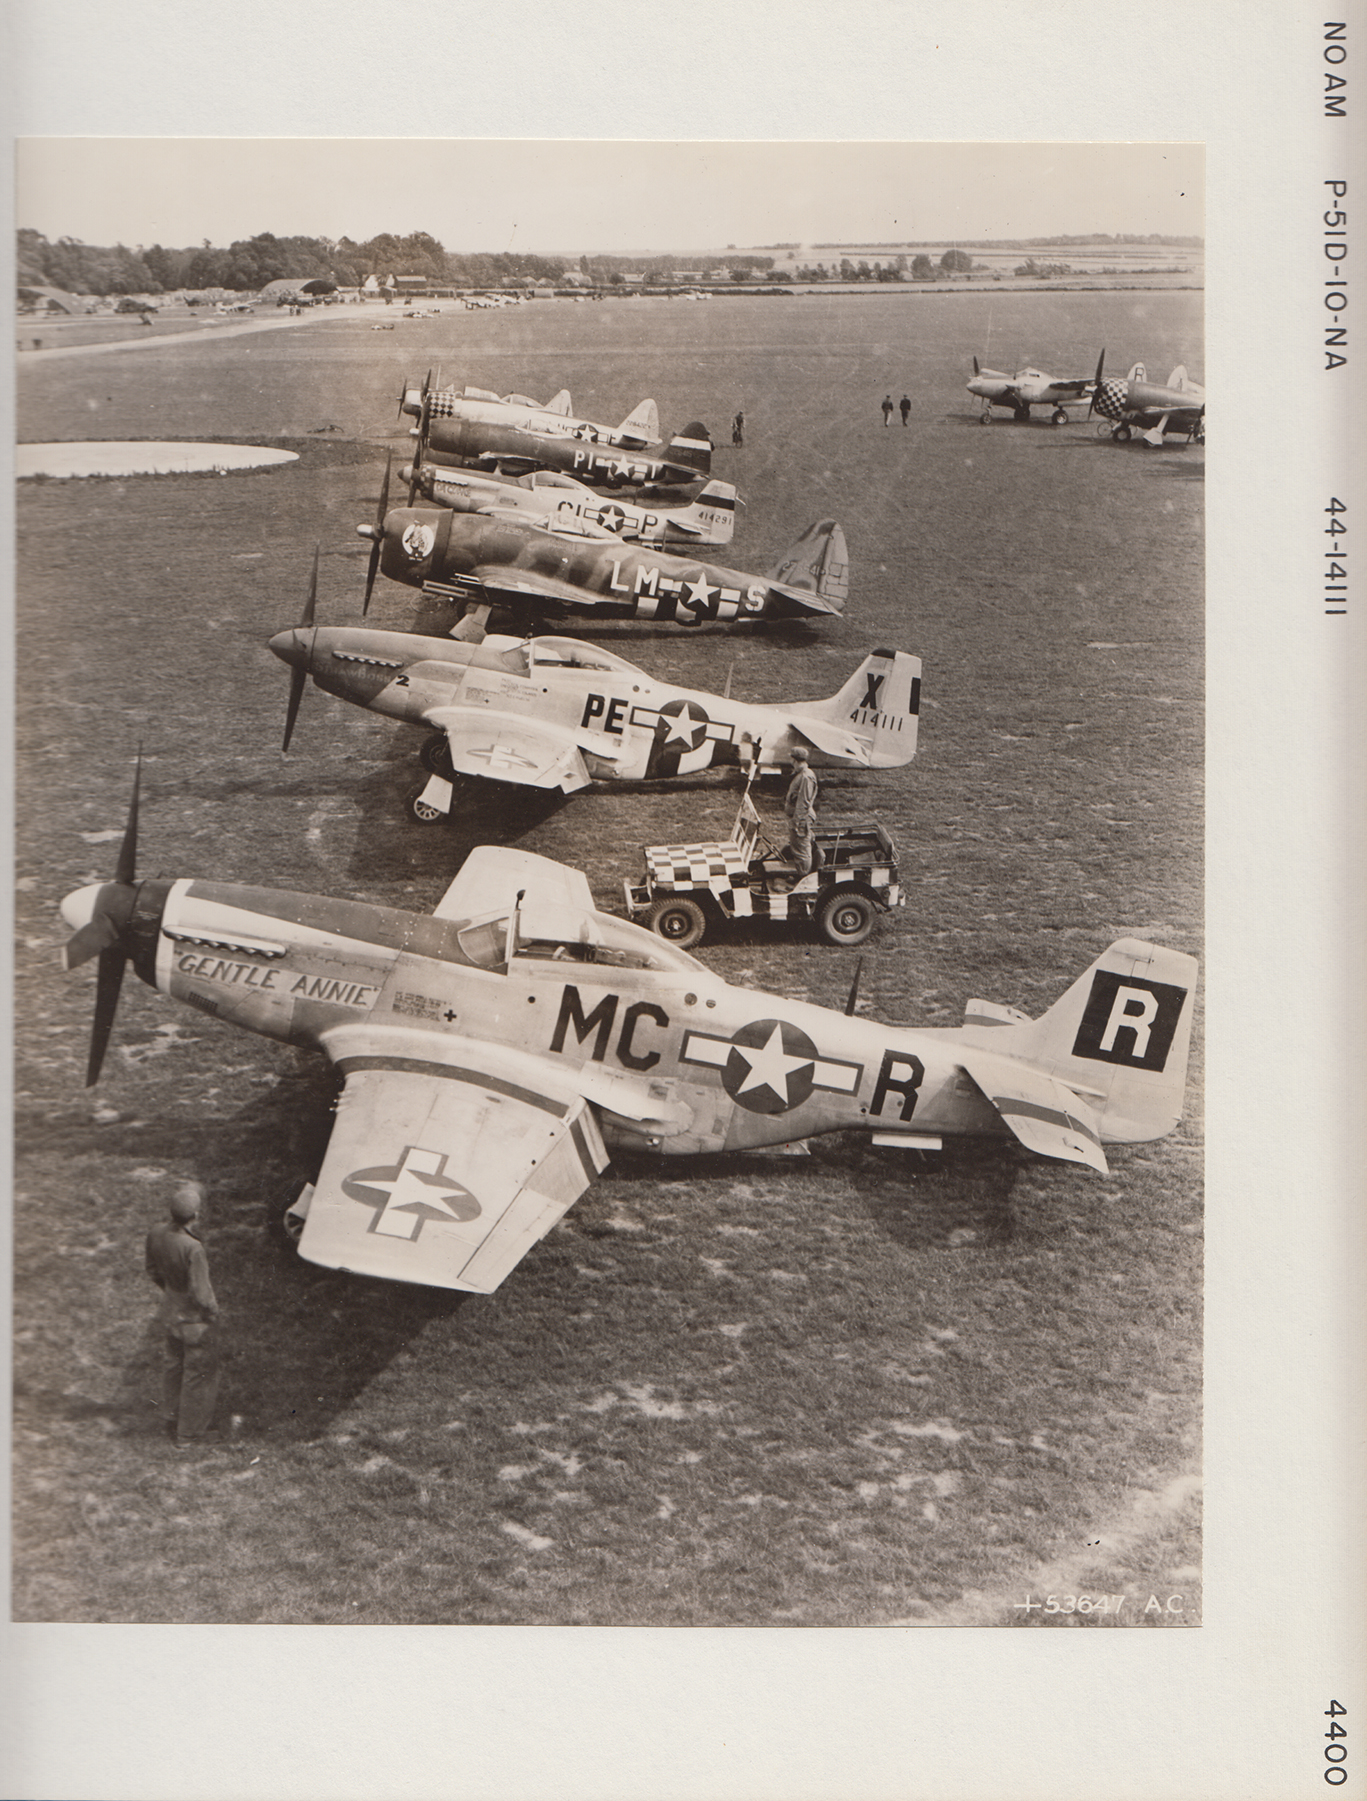 North American P-51D airplanes, undated (MS-344, Box 124, File 2, Identifier # 4400)